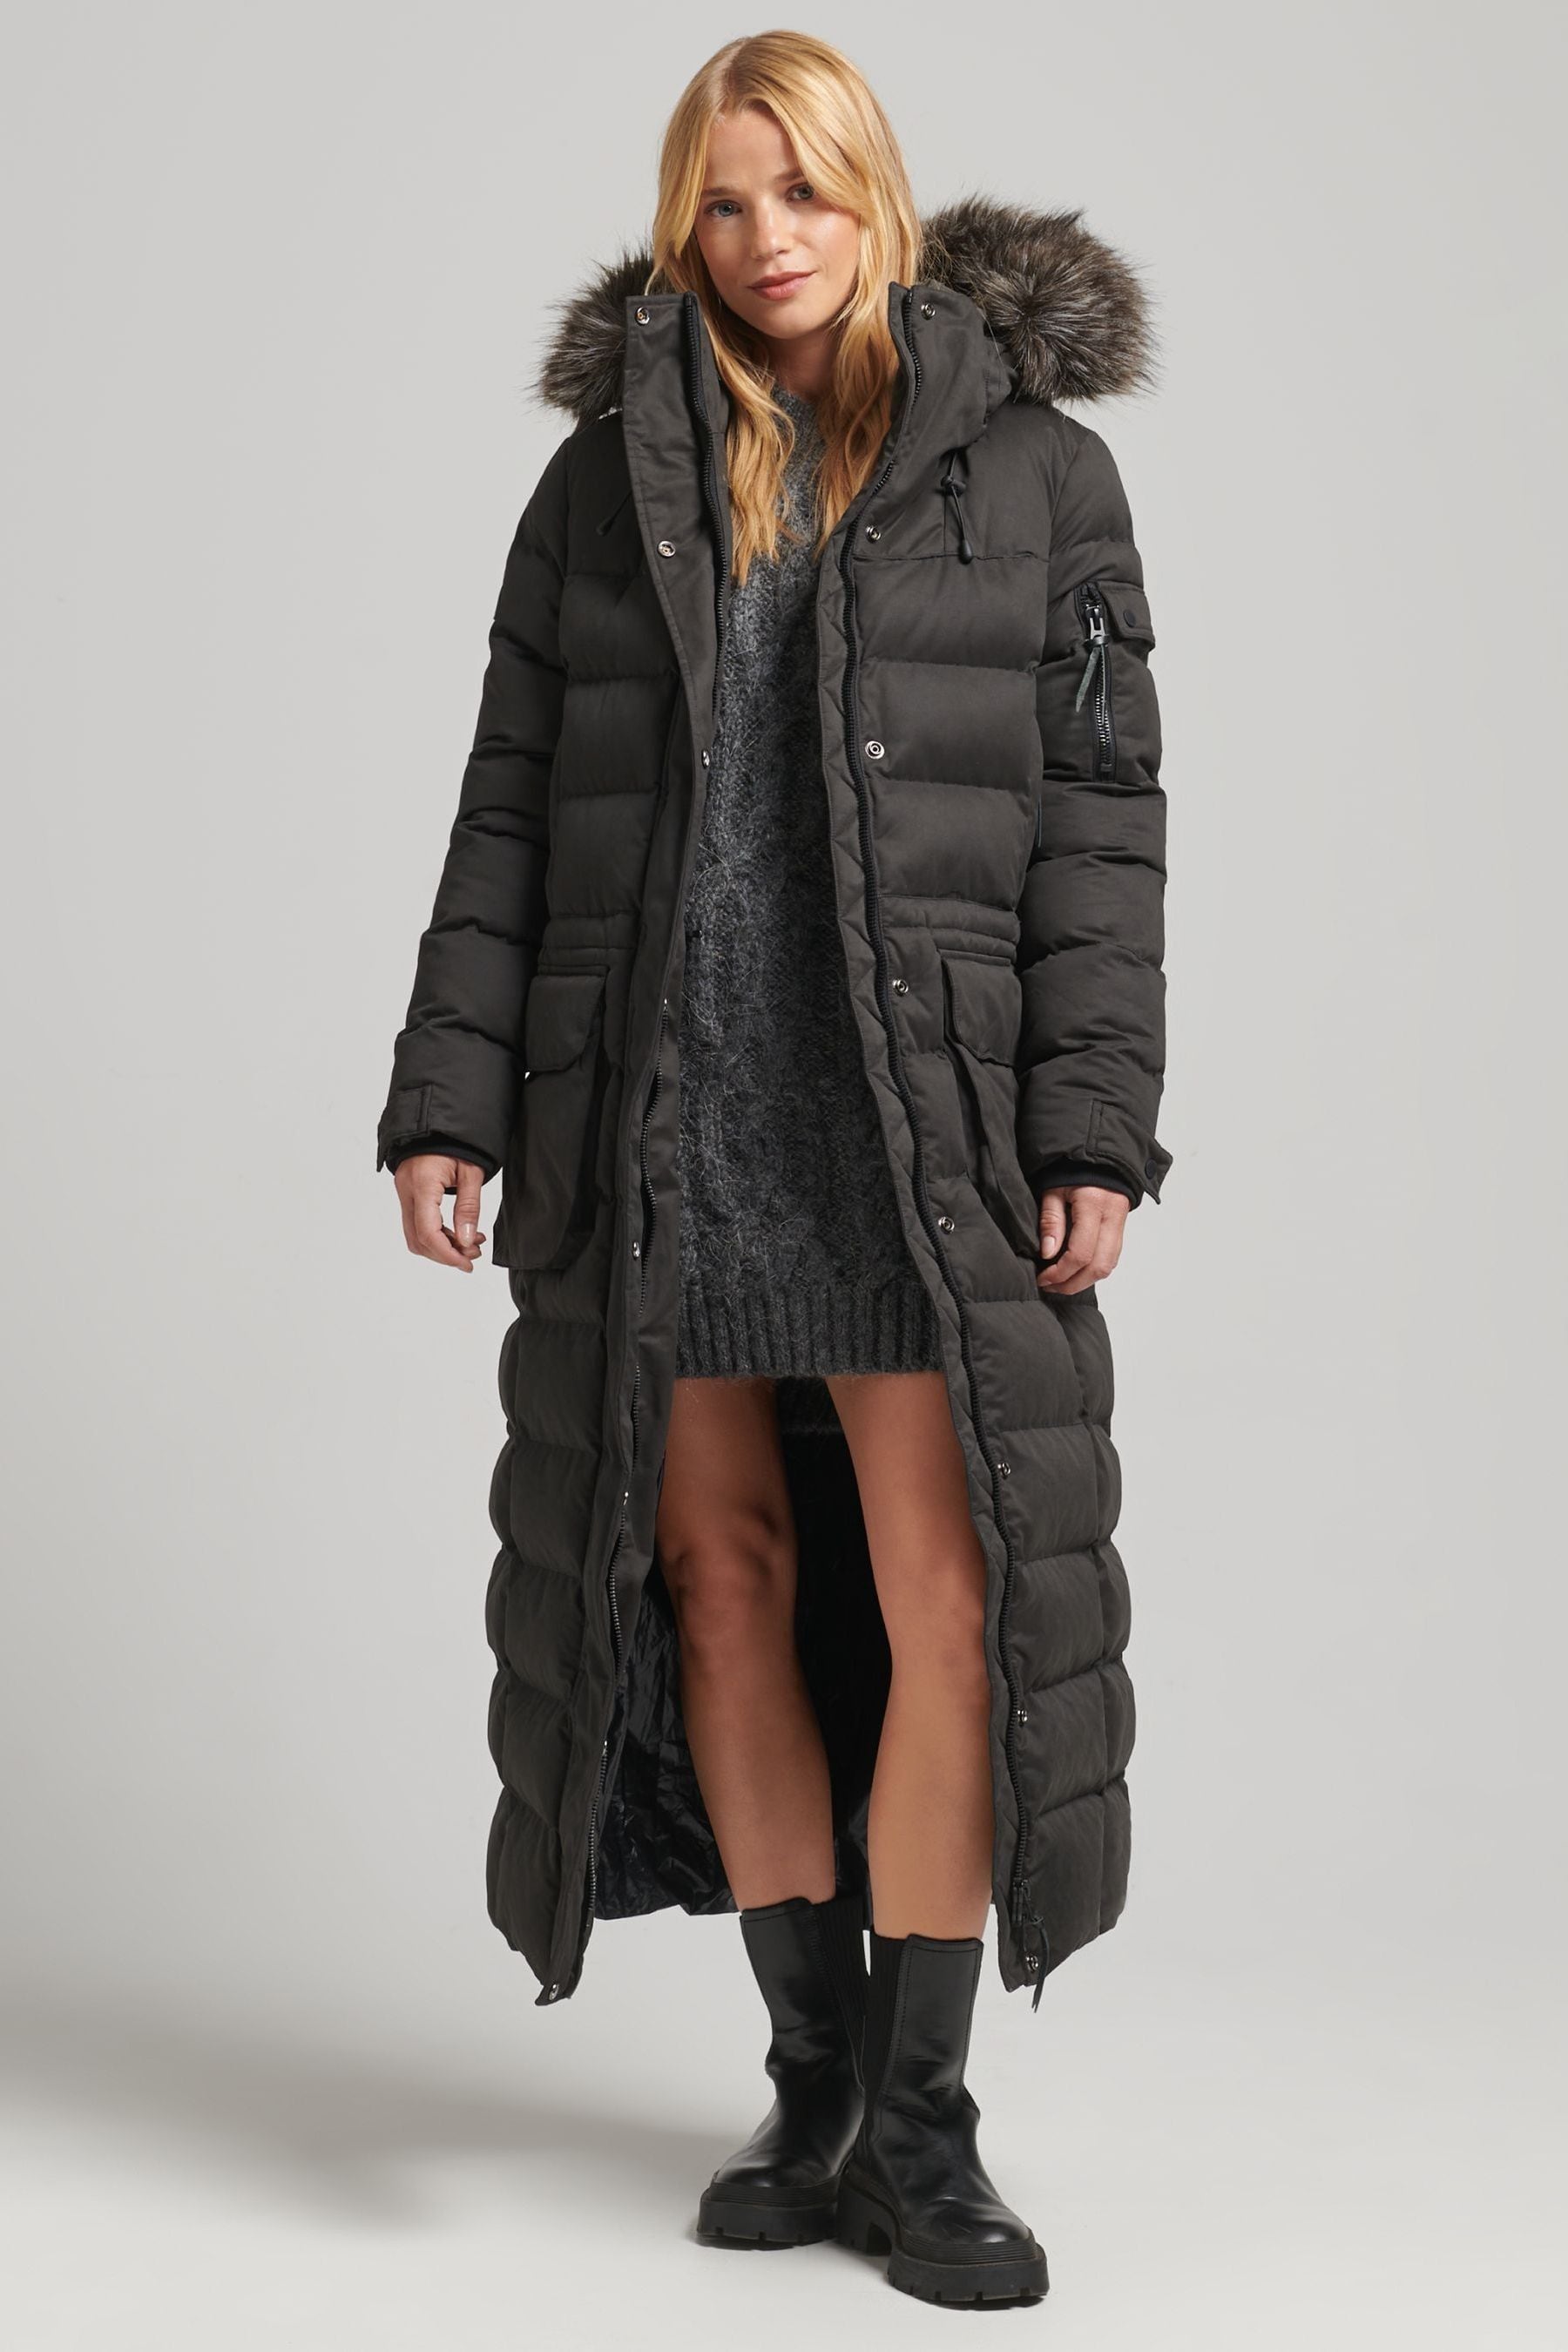 Buy Superdry Black Microfibre Expedition Longline Parka Coat from the ...